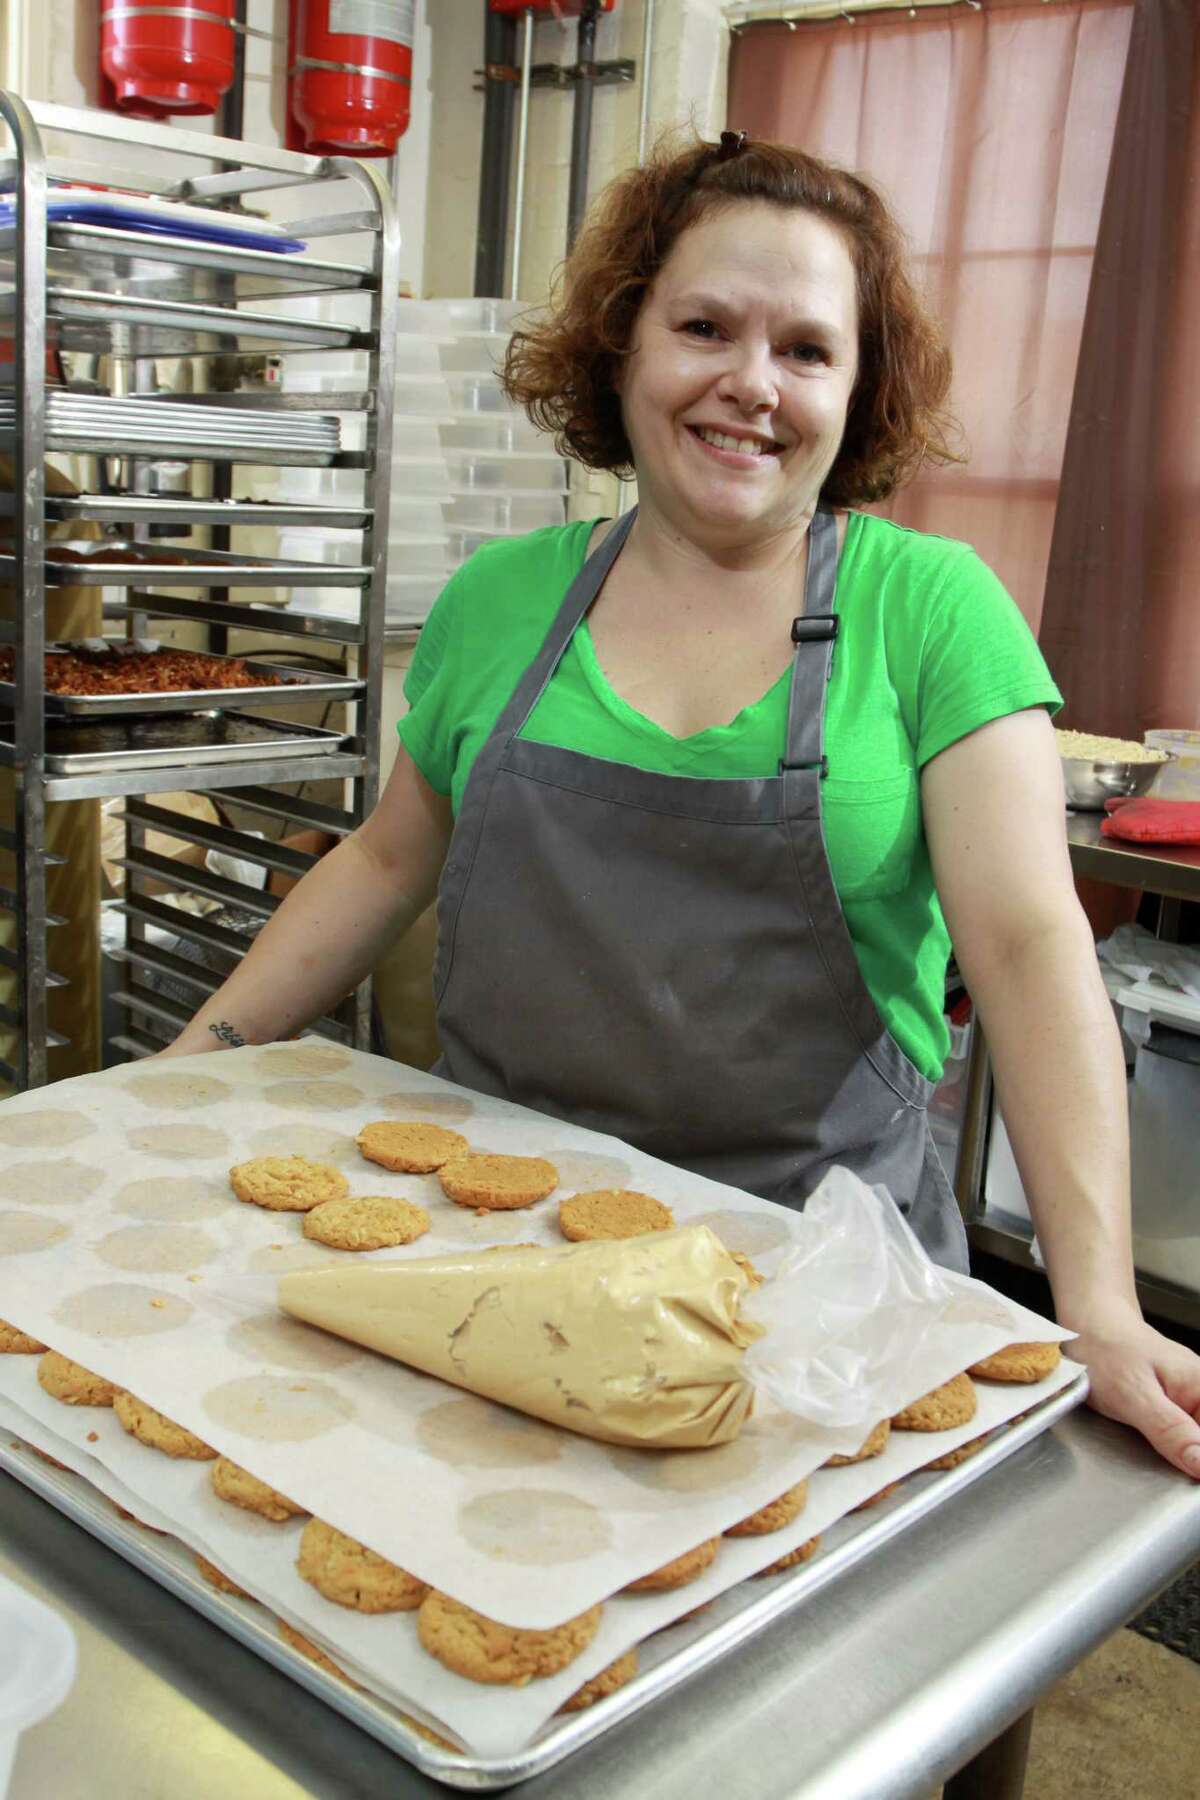 Pastry chef/owner Rebecca Masson raised $53,000 in a Kickstarter campaign to fund the opening of her bakery, Fluff Bake Bar.